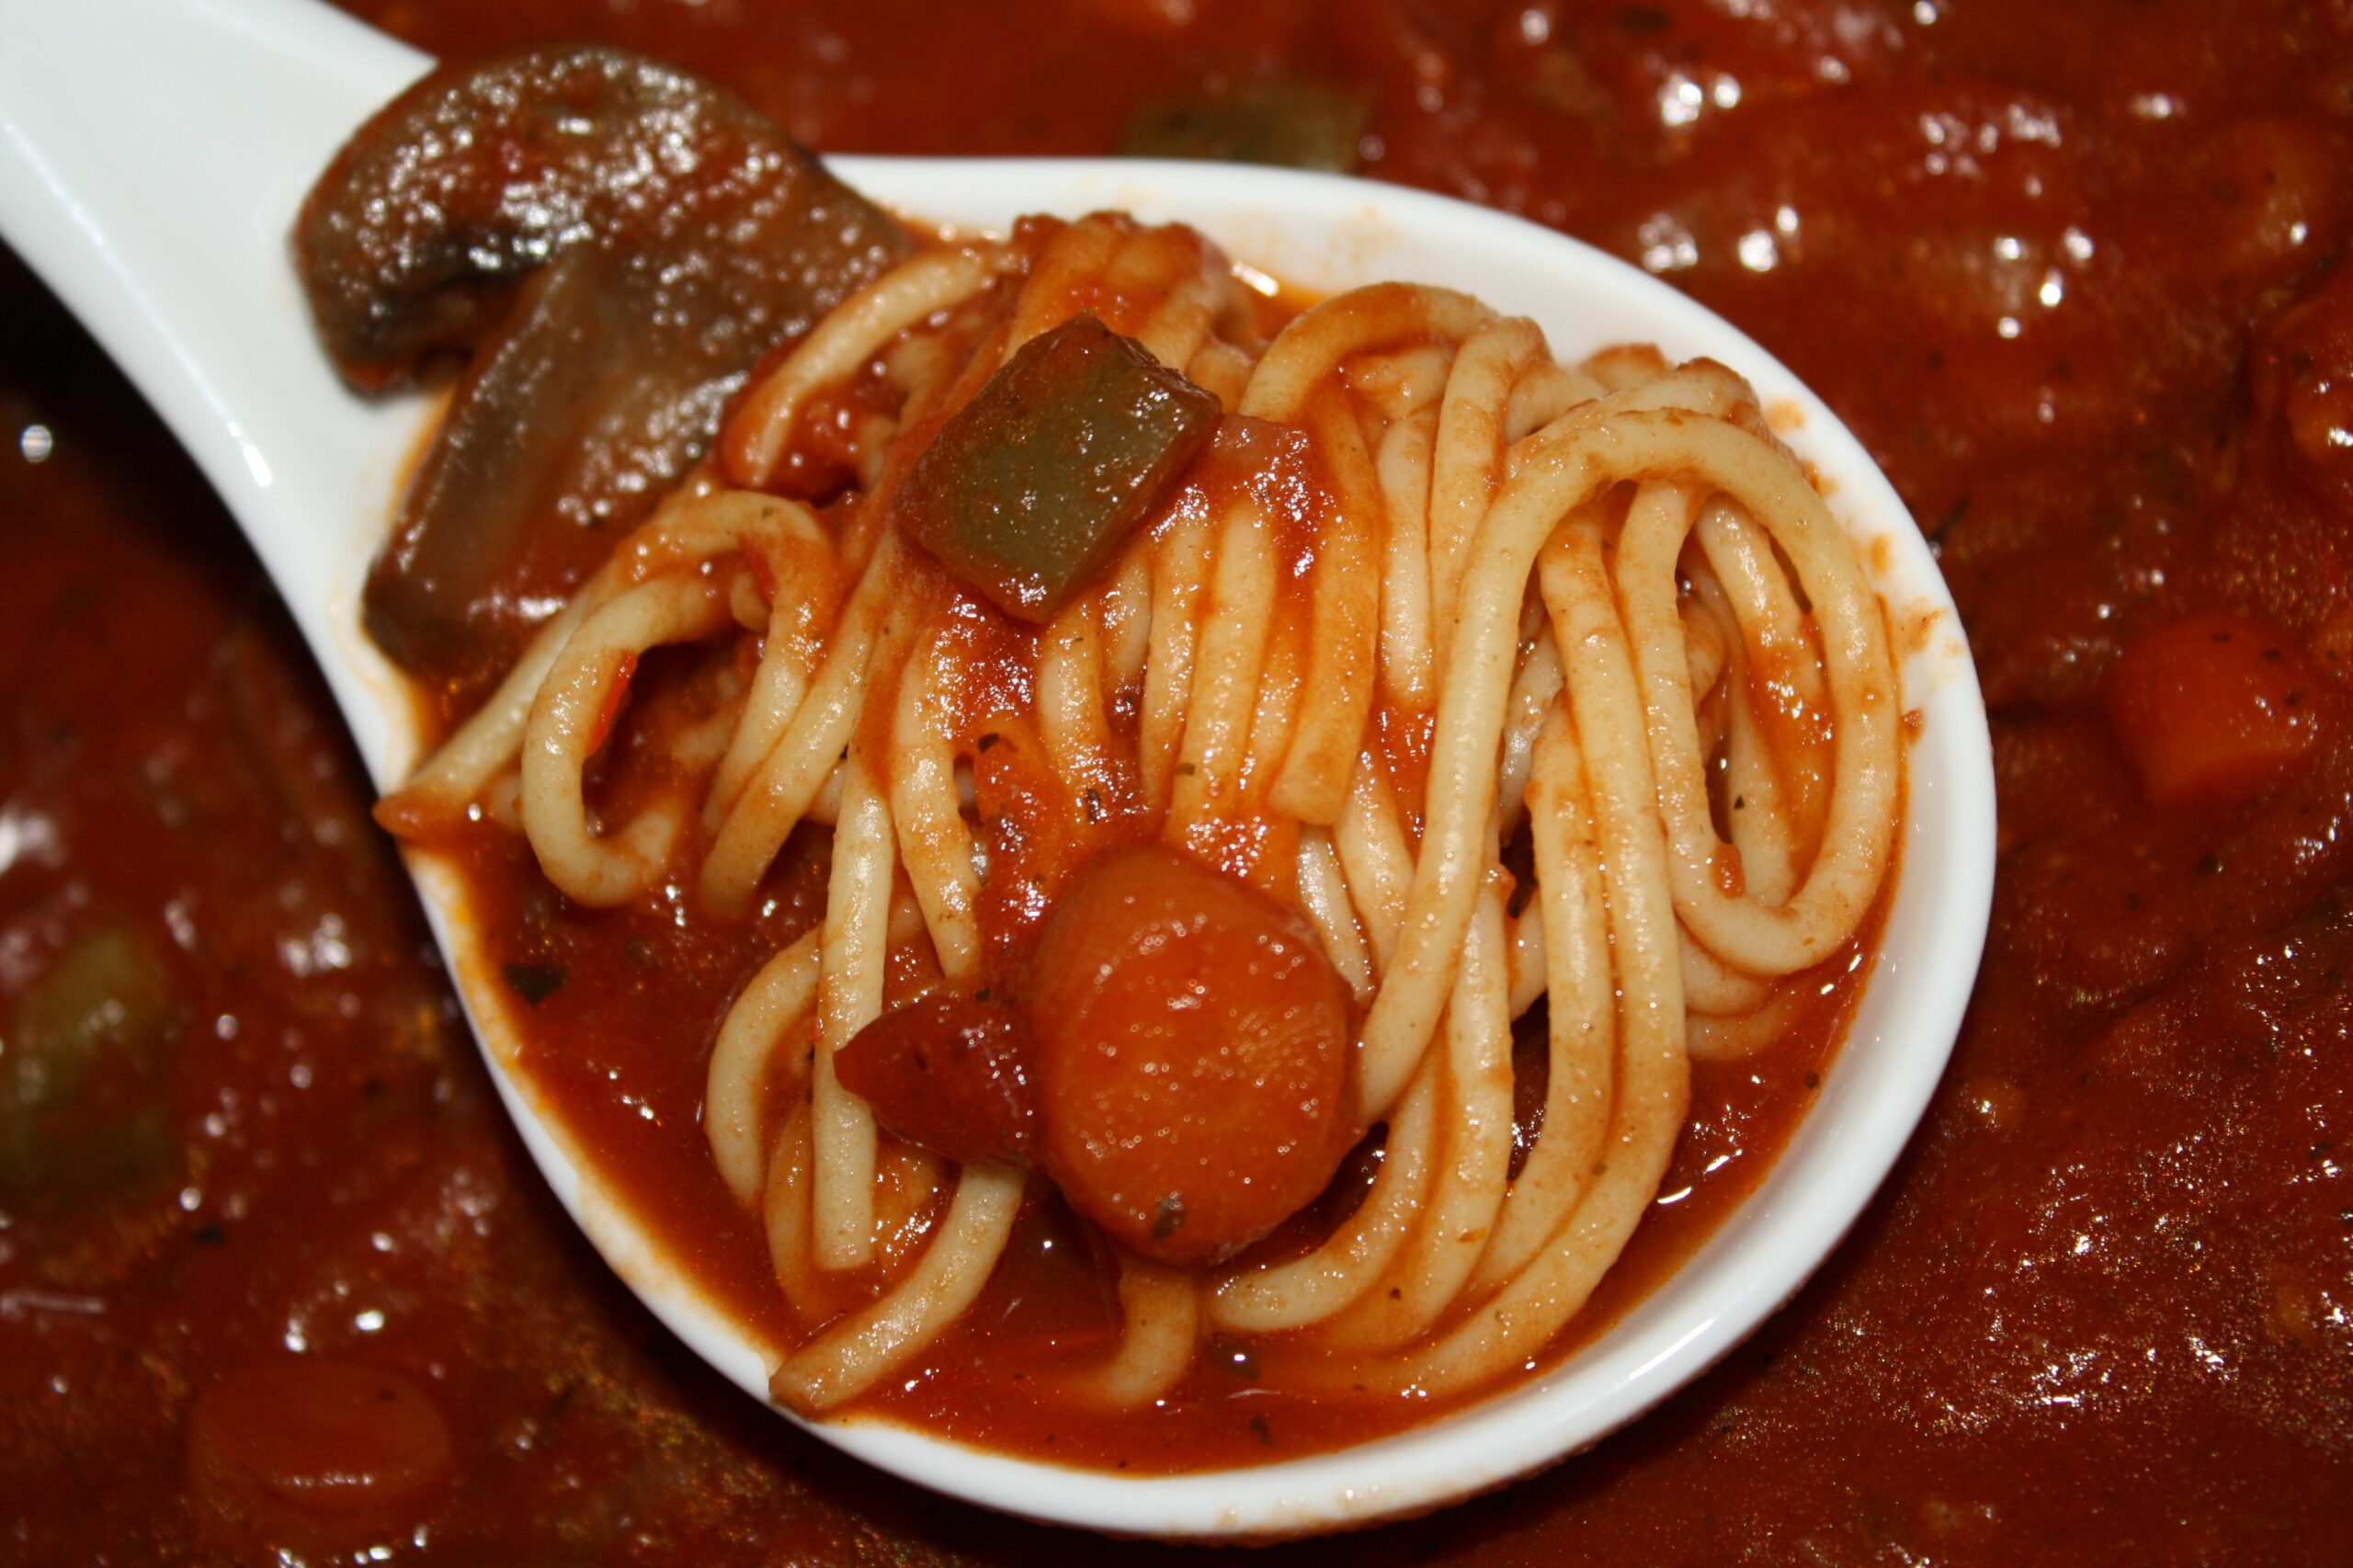  Perfectly cooked pasta, smothered in a warm, hearty sauce, ready to comfort you at the end of a long day.